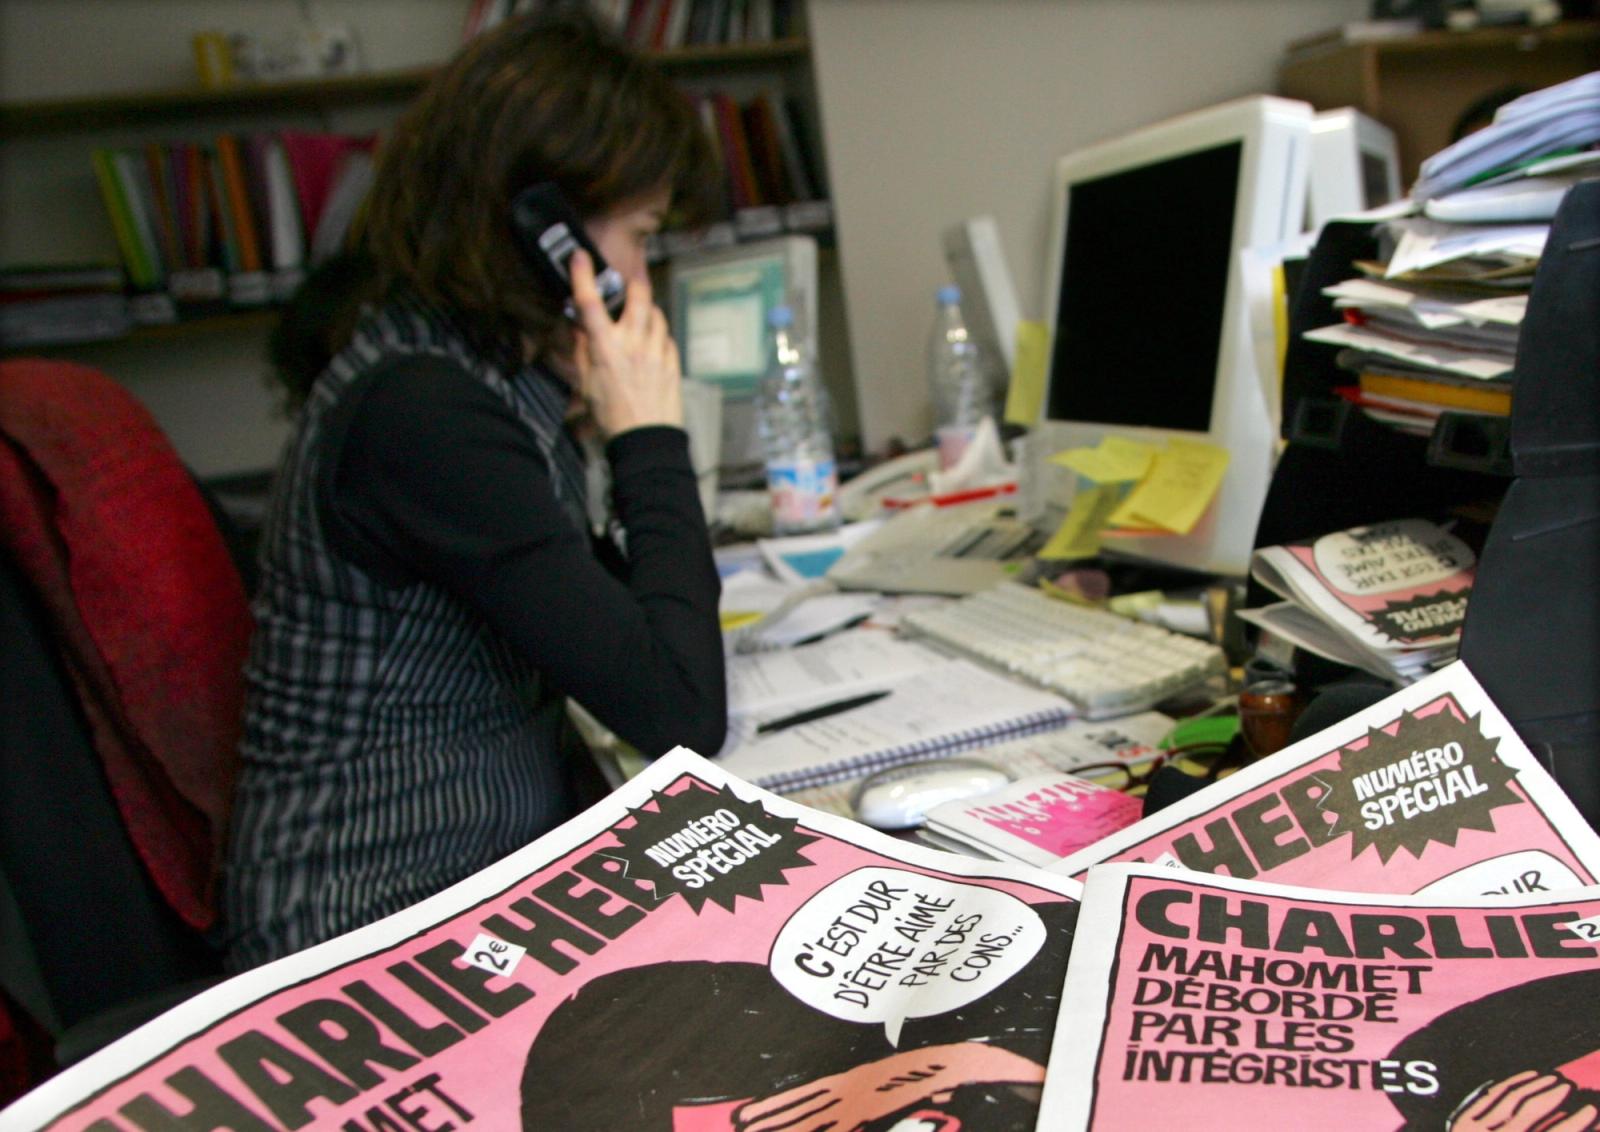 Copies of the French satirical weekly "Charlie Hebdo" seen in their Paris newsroom.